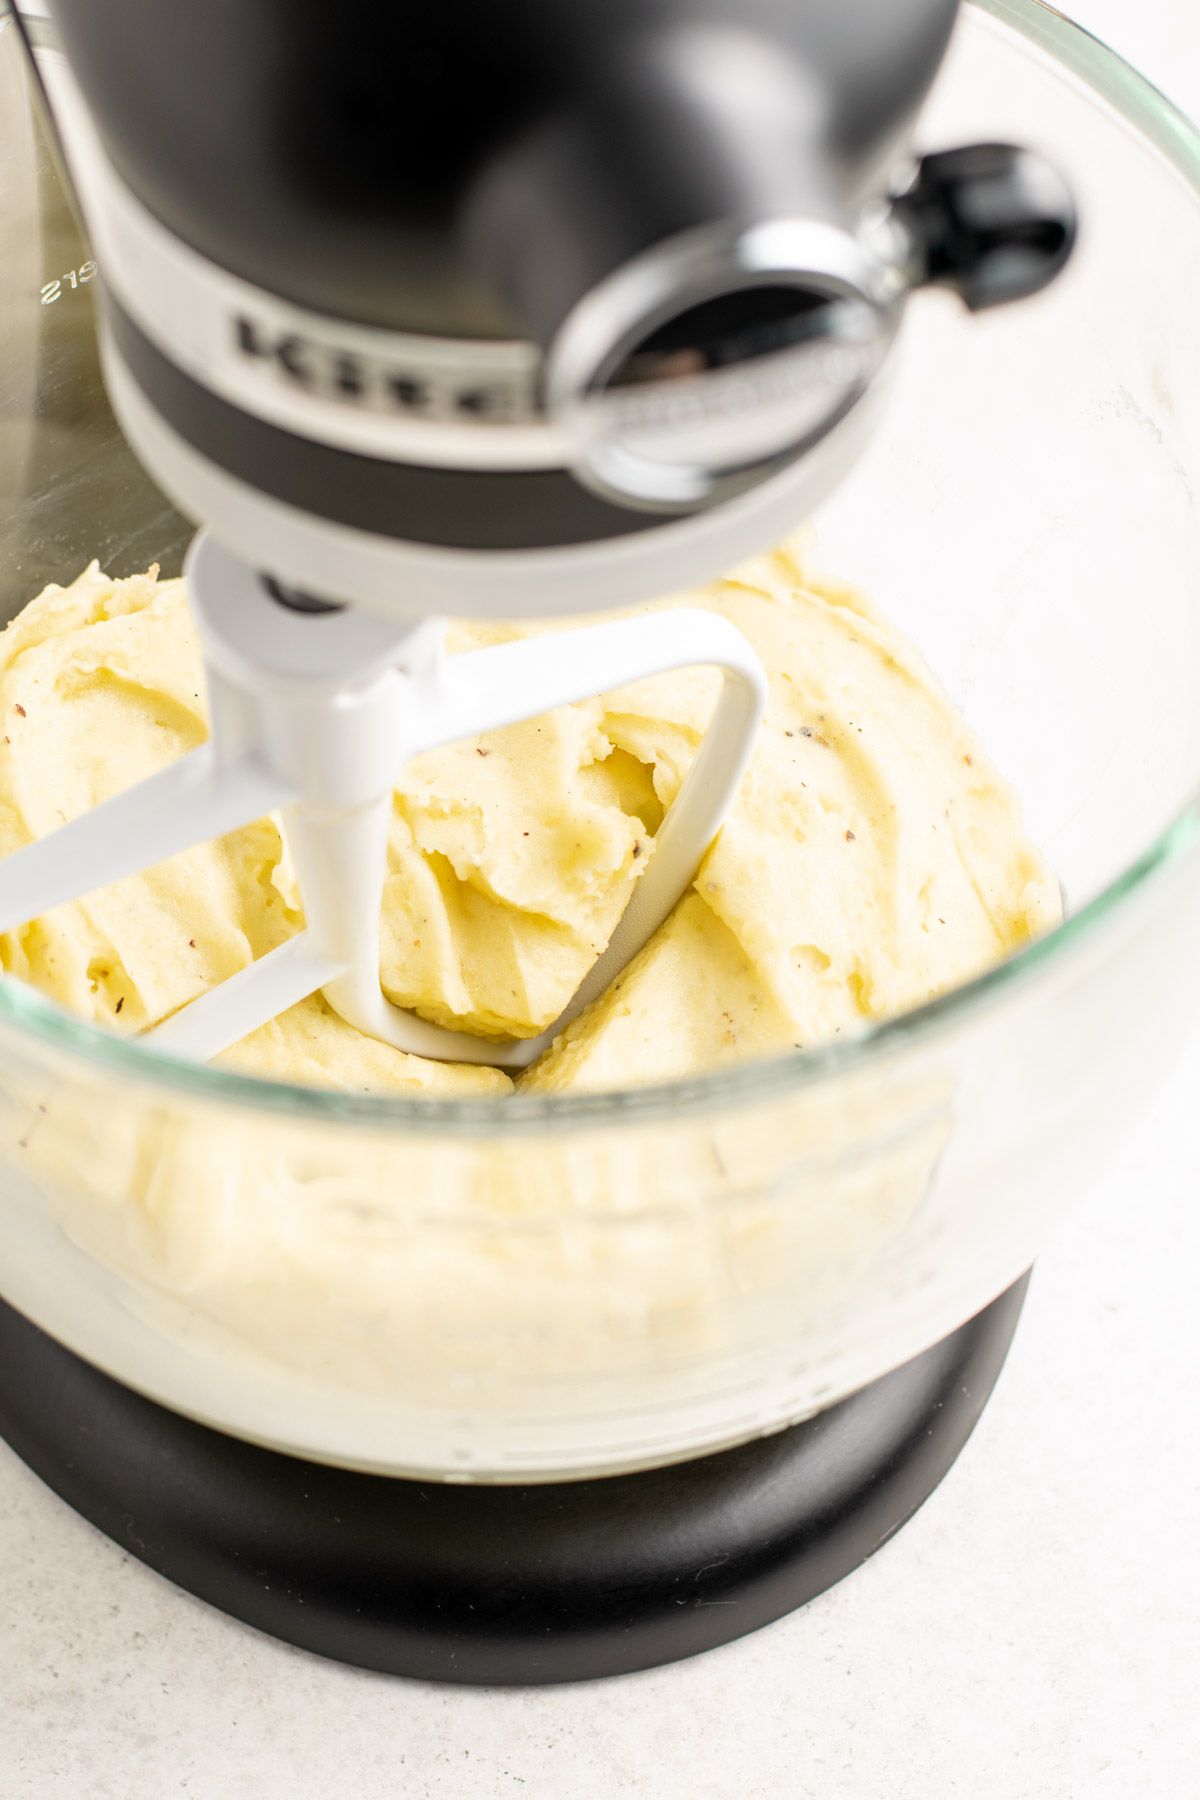 mashed potatoes being mashed in a kitchenaid stand mixer.